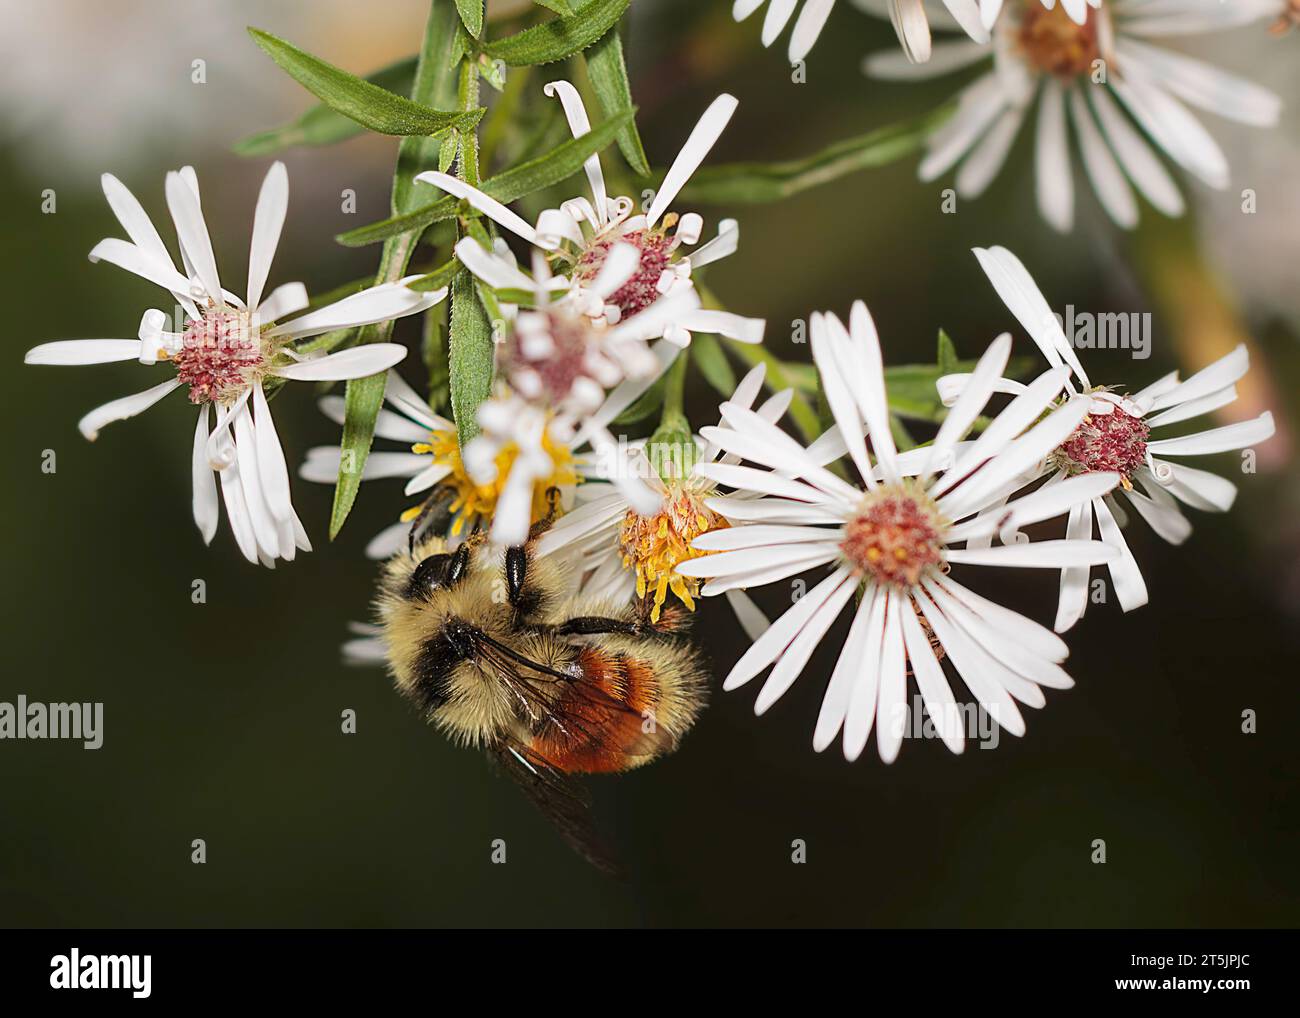 Bee feeding on White Aster (Symphyotrichum ericoides) flowers in the Chippewa National Forest, northern Minnesota USA Stock Photo